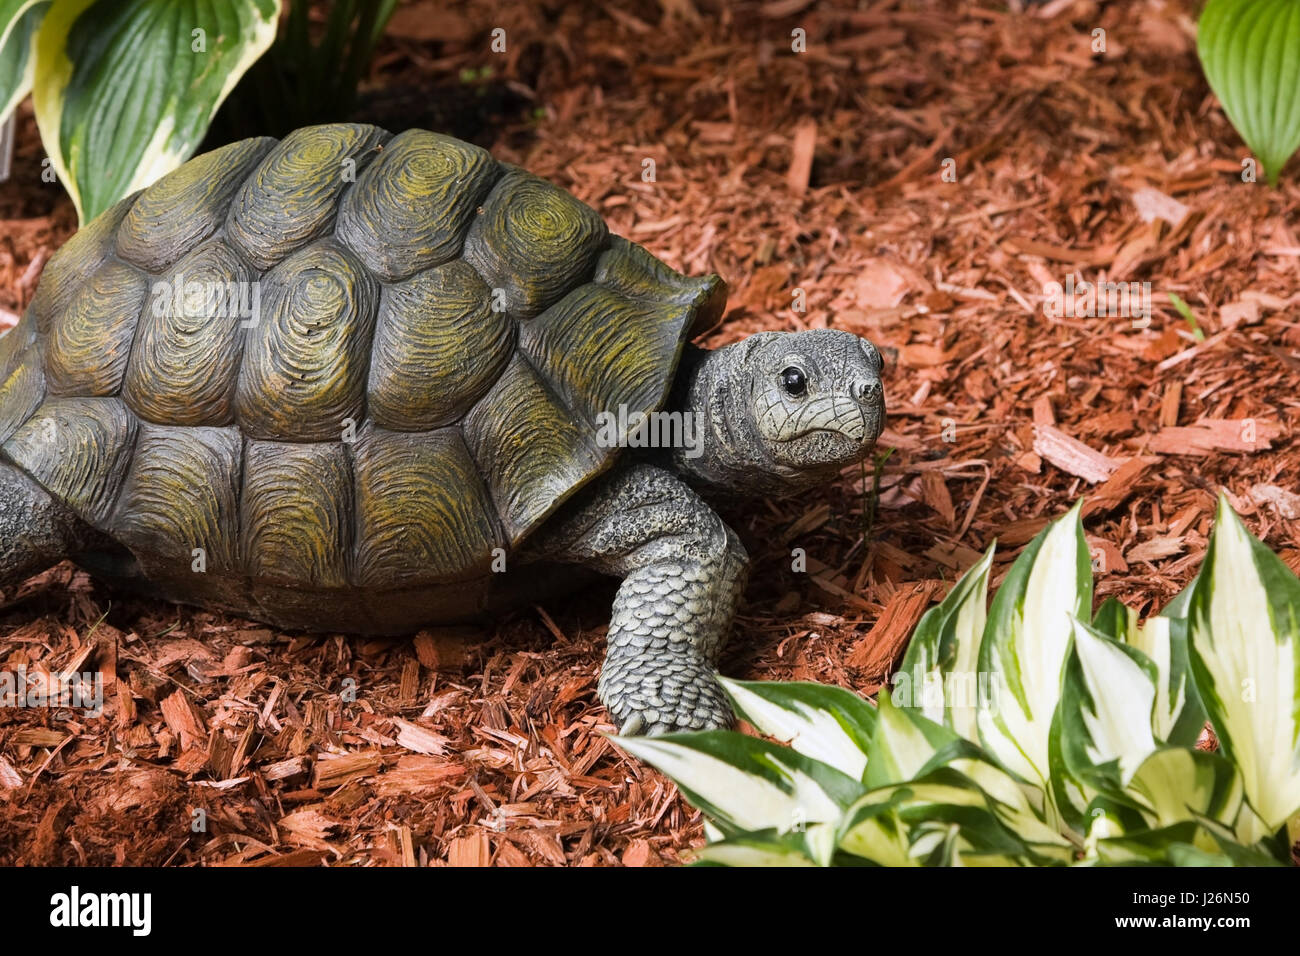 Turtle statue in a landscaped front yard garden in summer Stock Photo